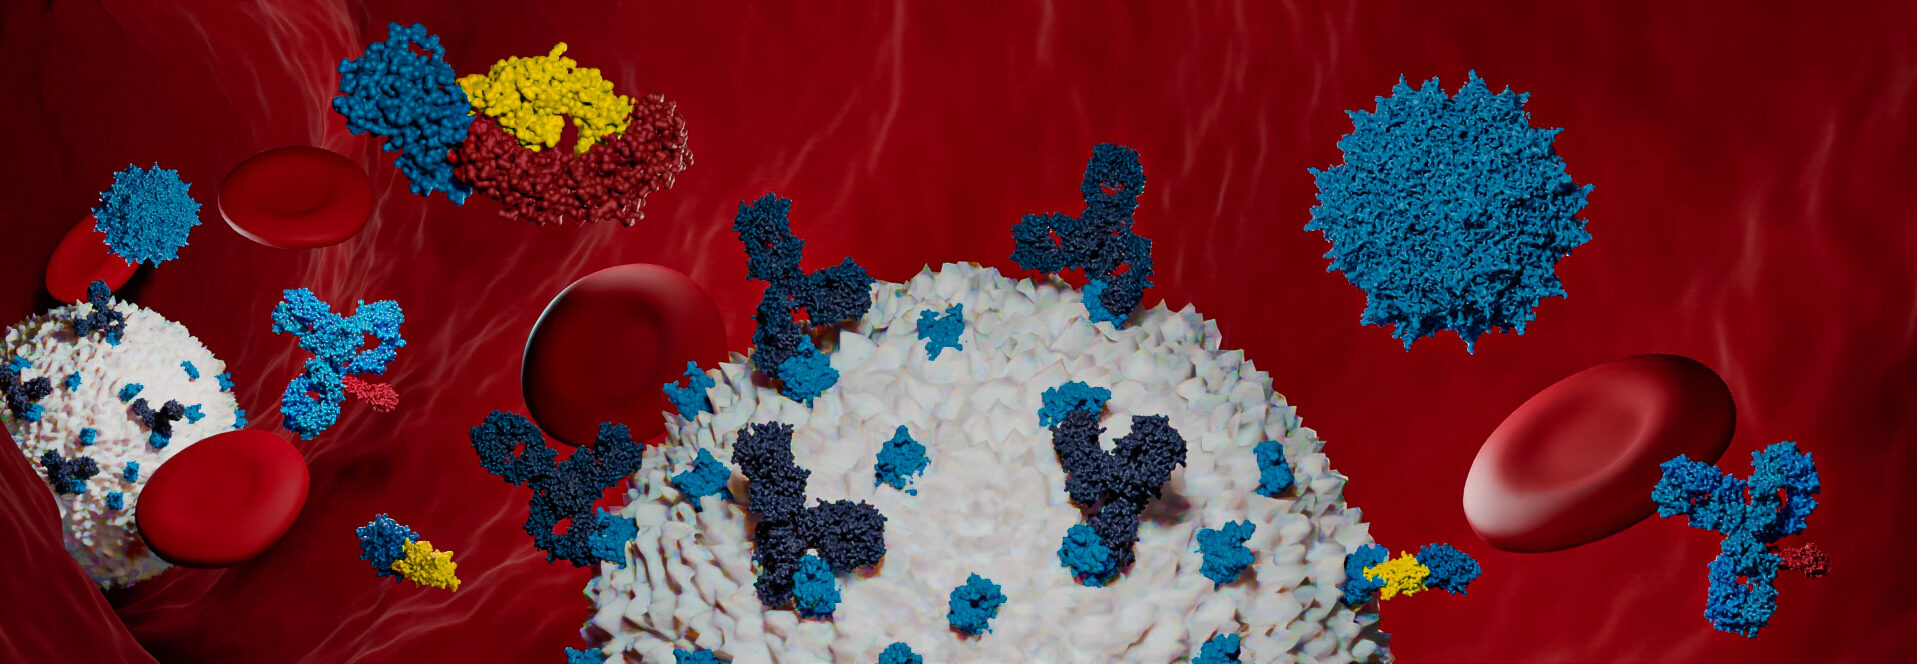 3d render of AAVs, nanobodies and blue igG antibodies binding receptors on a white t-cell in a red blood vessel scene generated by Biofidus AG